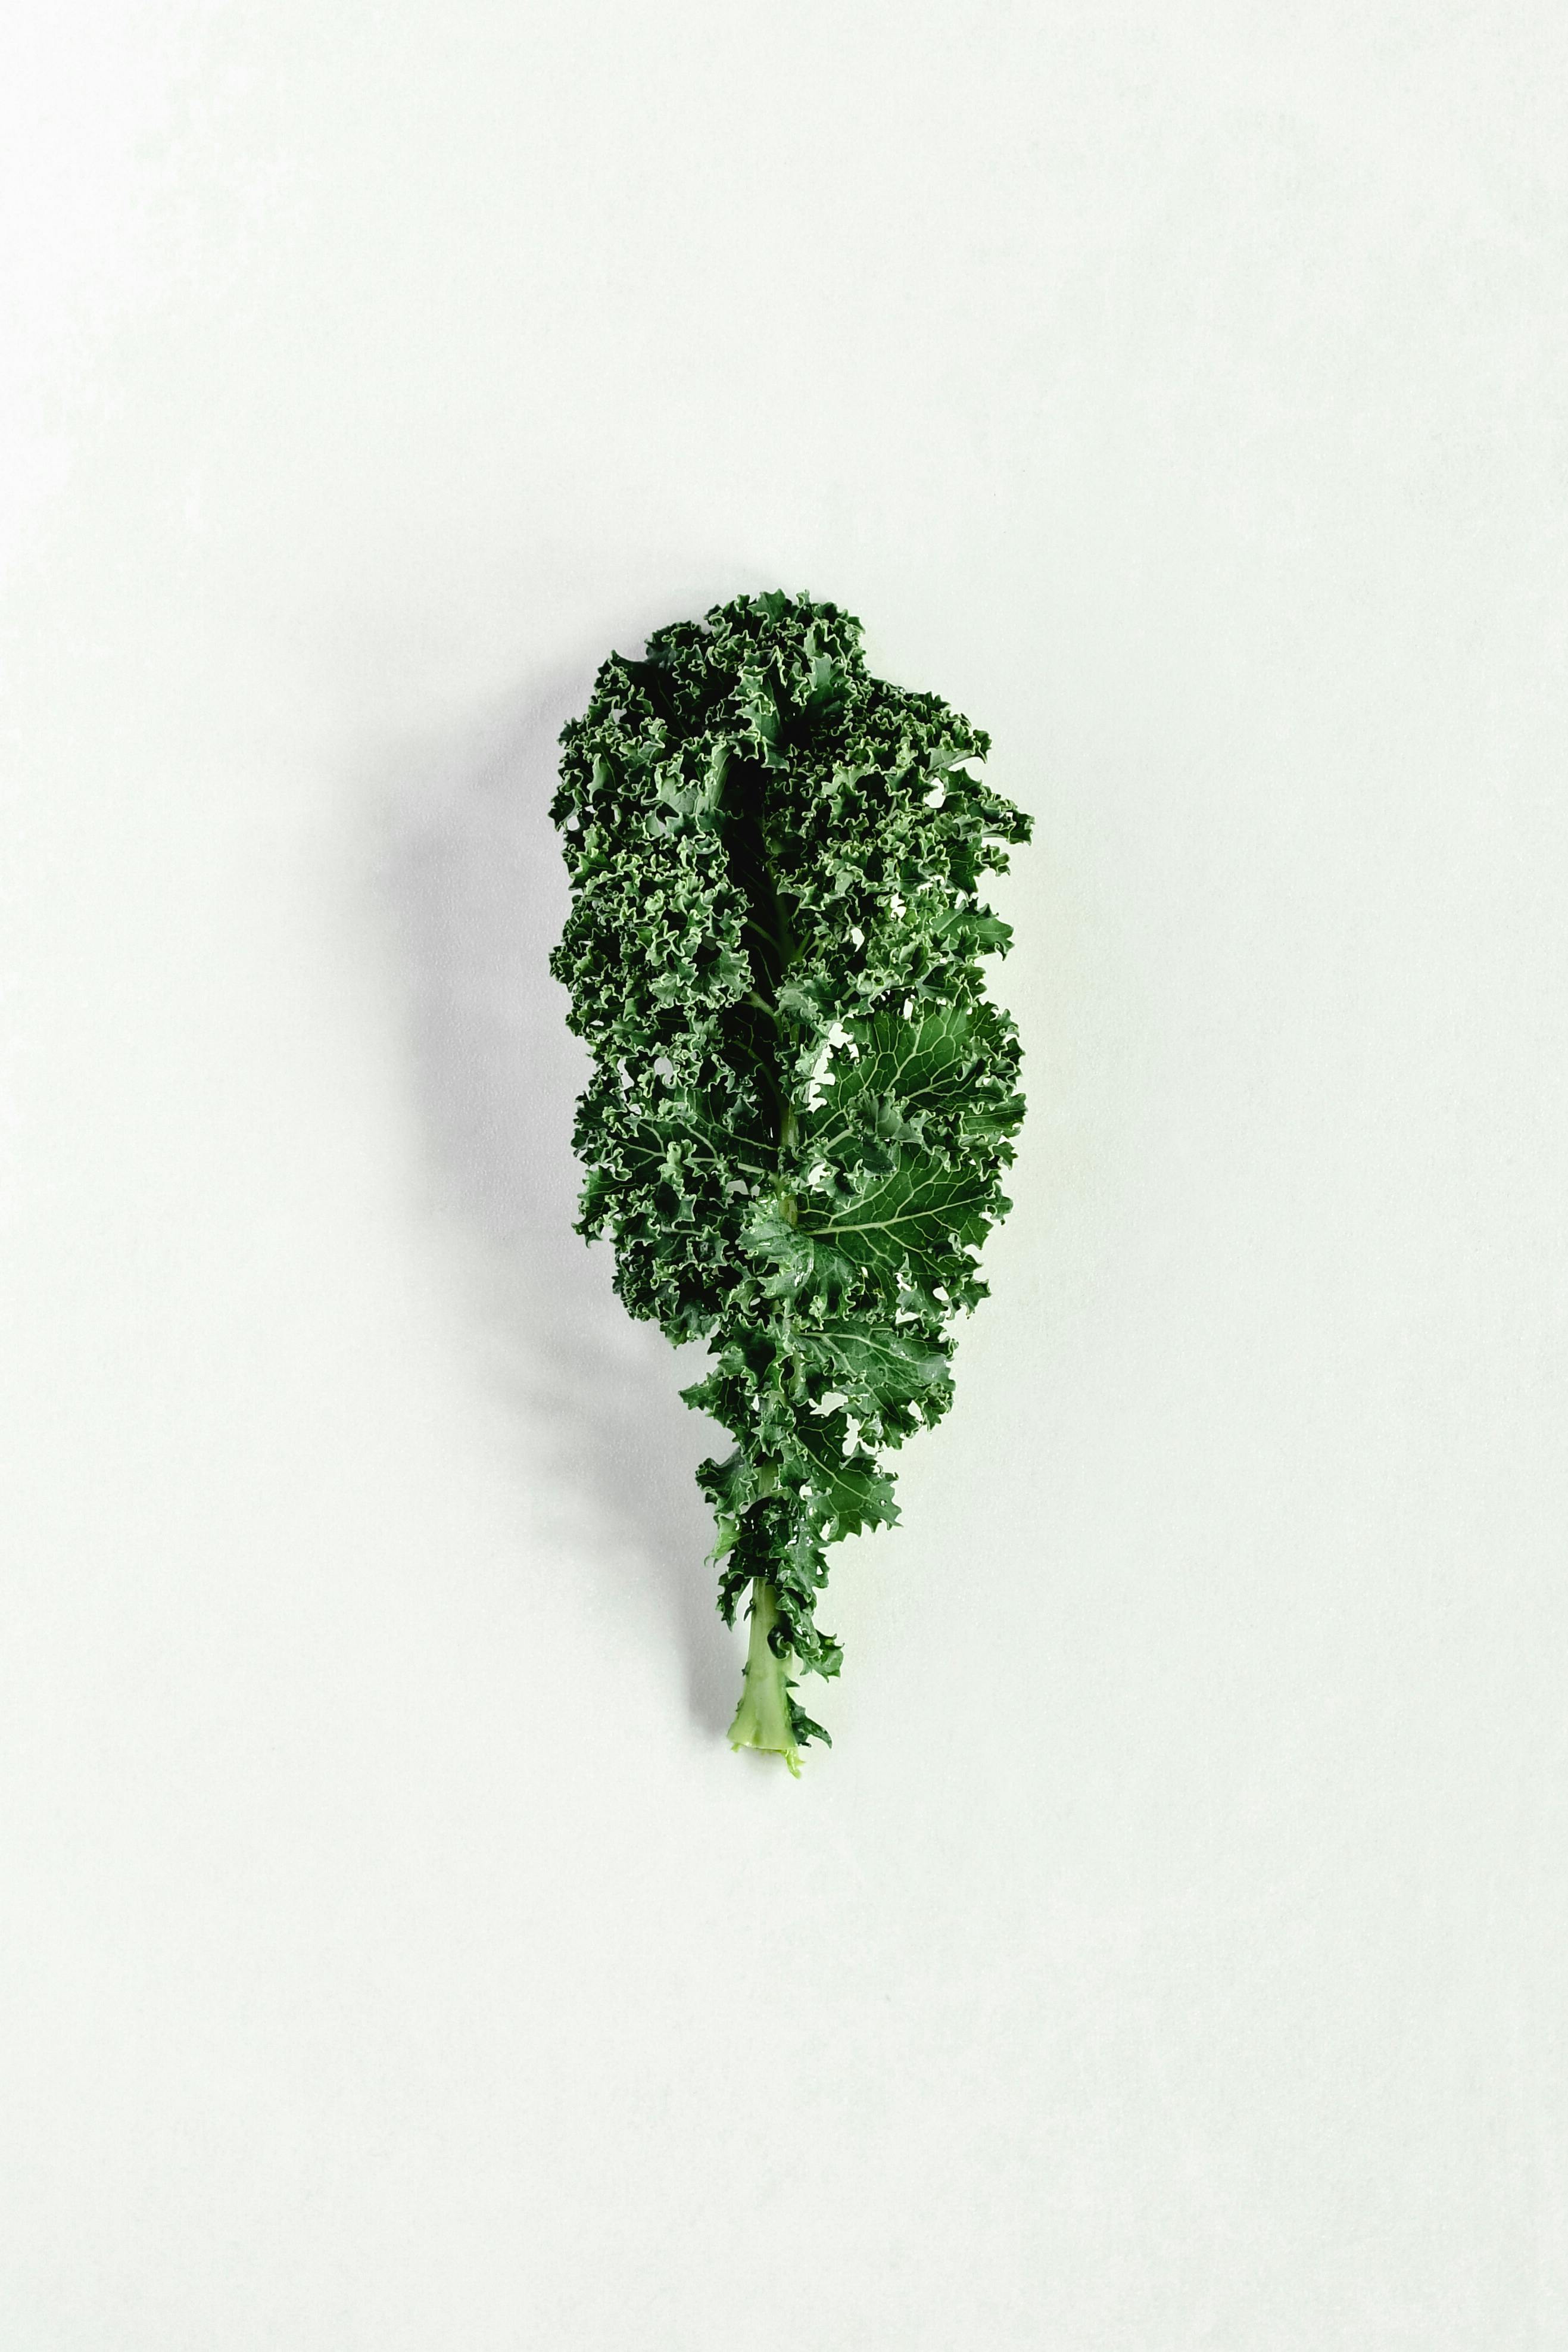 What are the benefits of kale powder